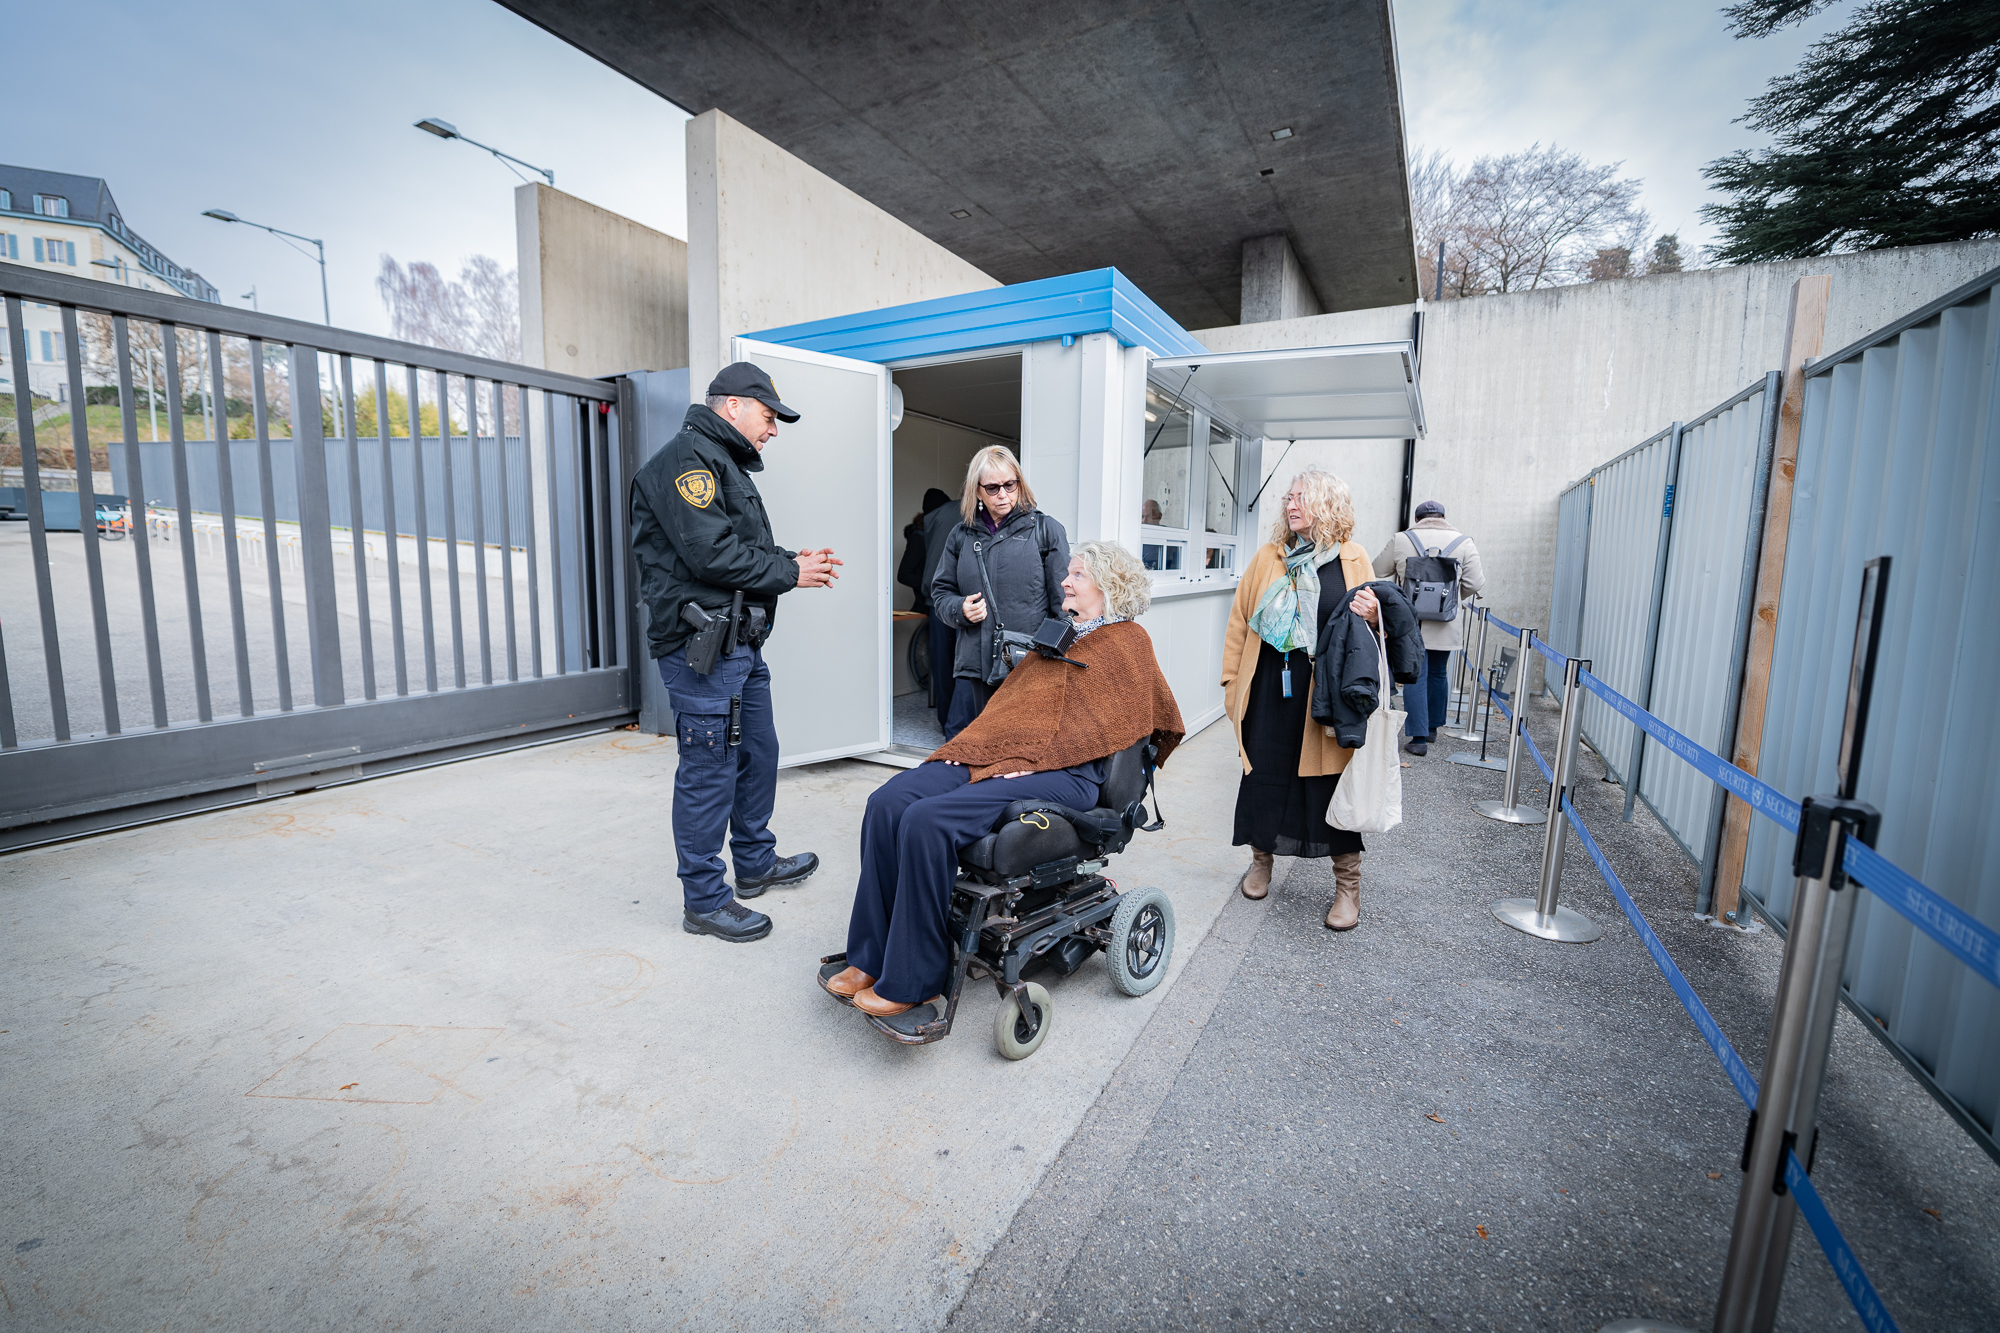 Next to a large grey gate, a Security and Safety Service officer speaks with a woman who is using a wheelchair. Two other women stand behind her.